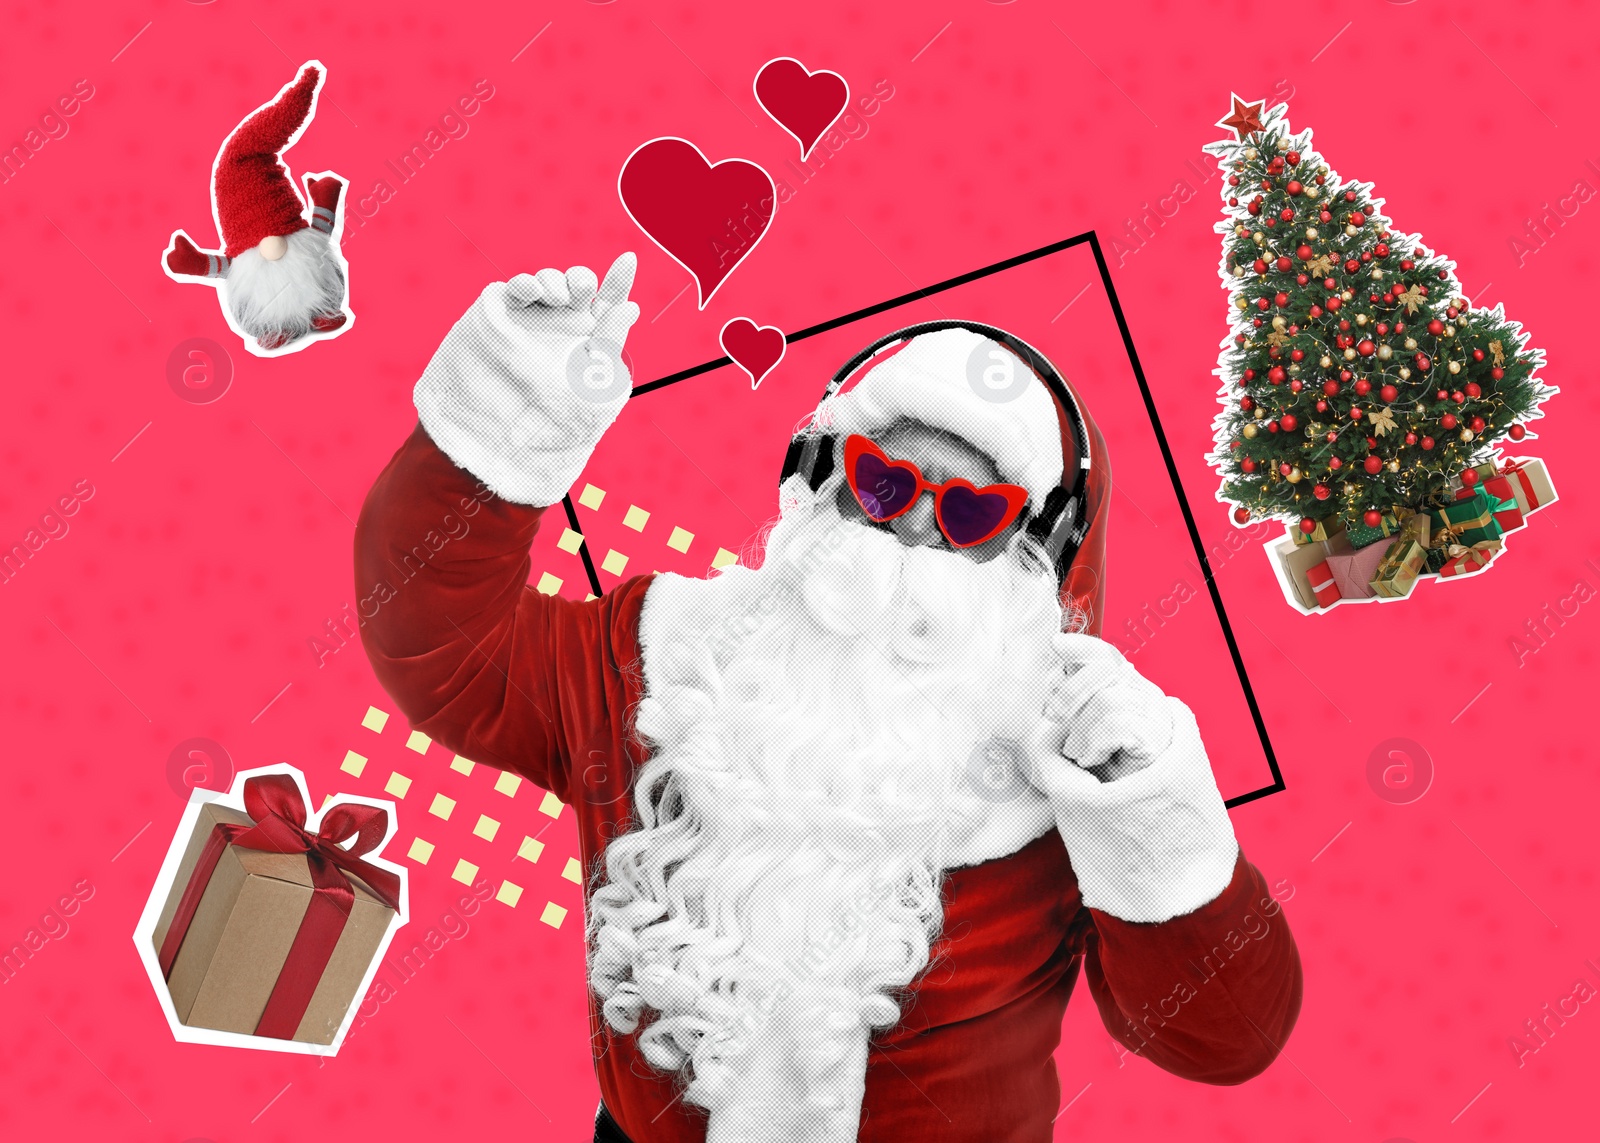 Image of Winter holidays bright artwork. Santa Claus listening to music via headphones, Christmas tree, gift boa and elf against color background, creative collage